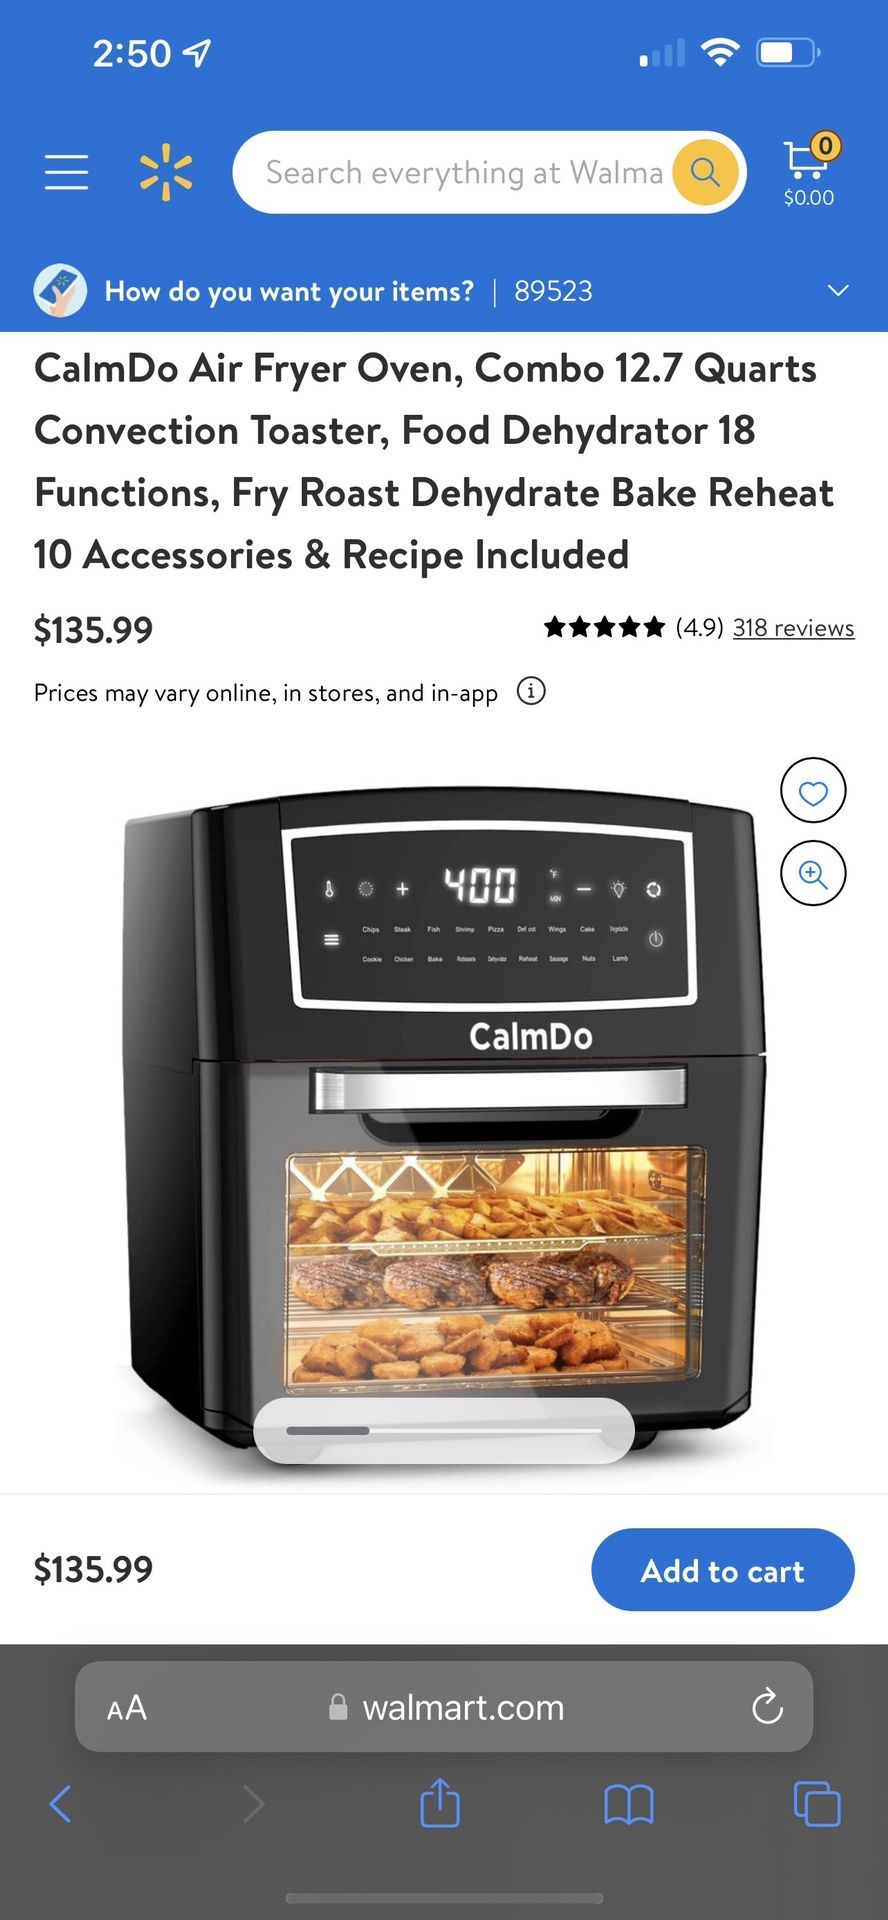 CalmDo Air Fryer Oven, Combo 12.7 Quarts Convection Toaster, Food Dehydrator